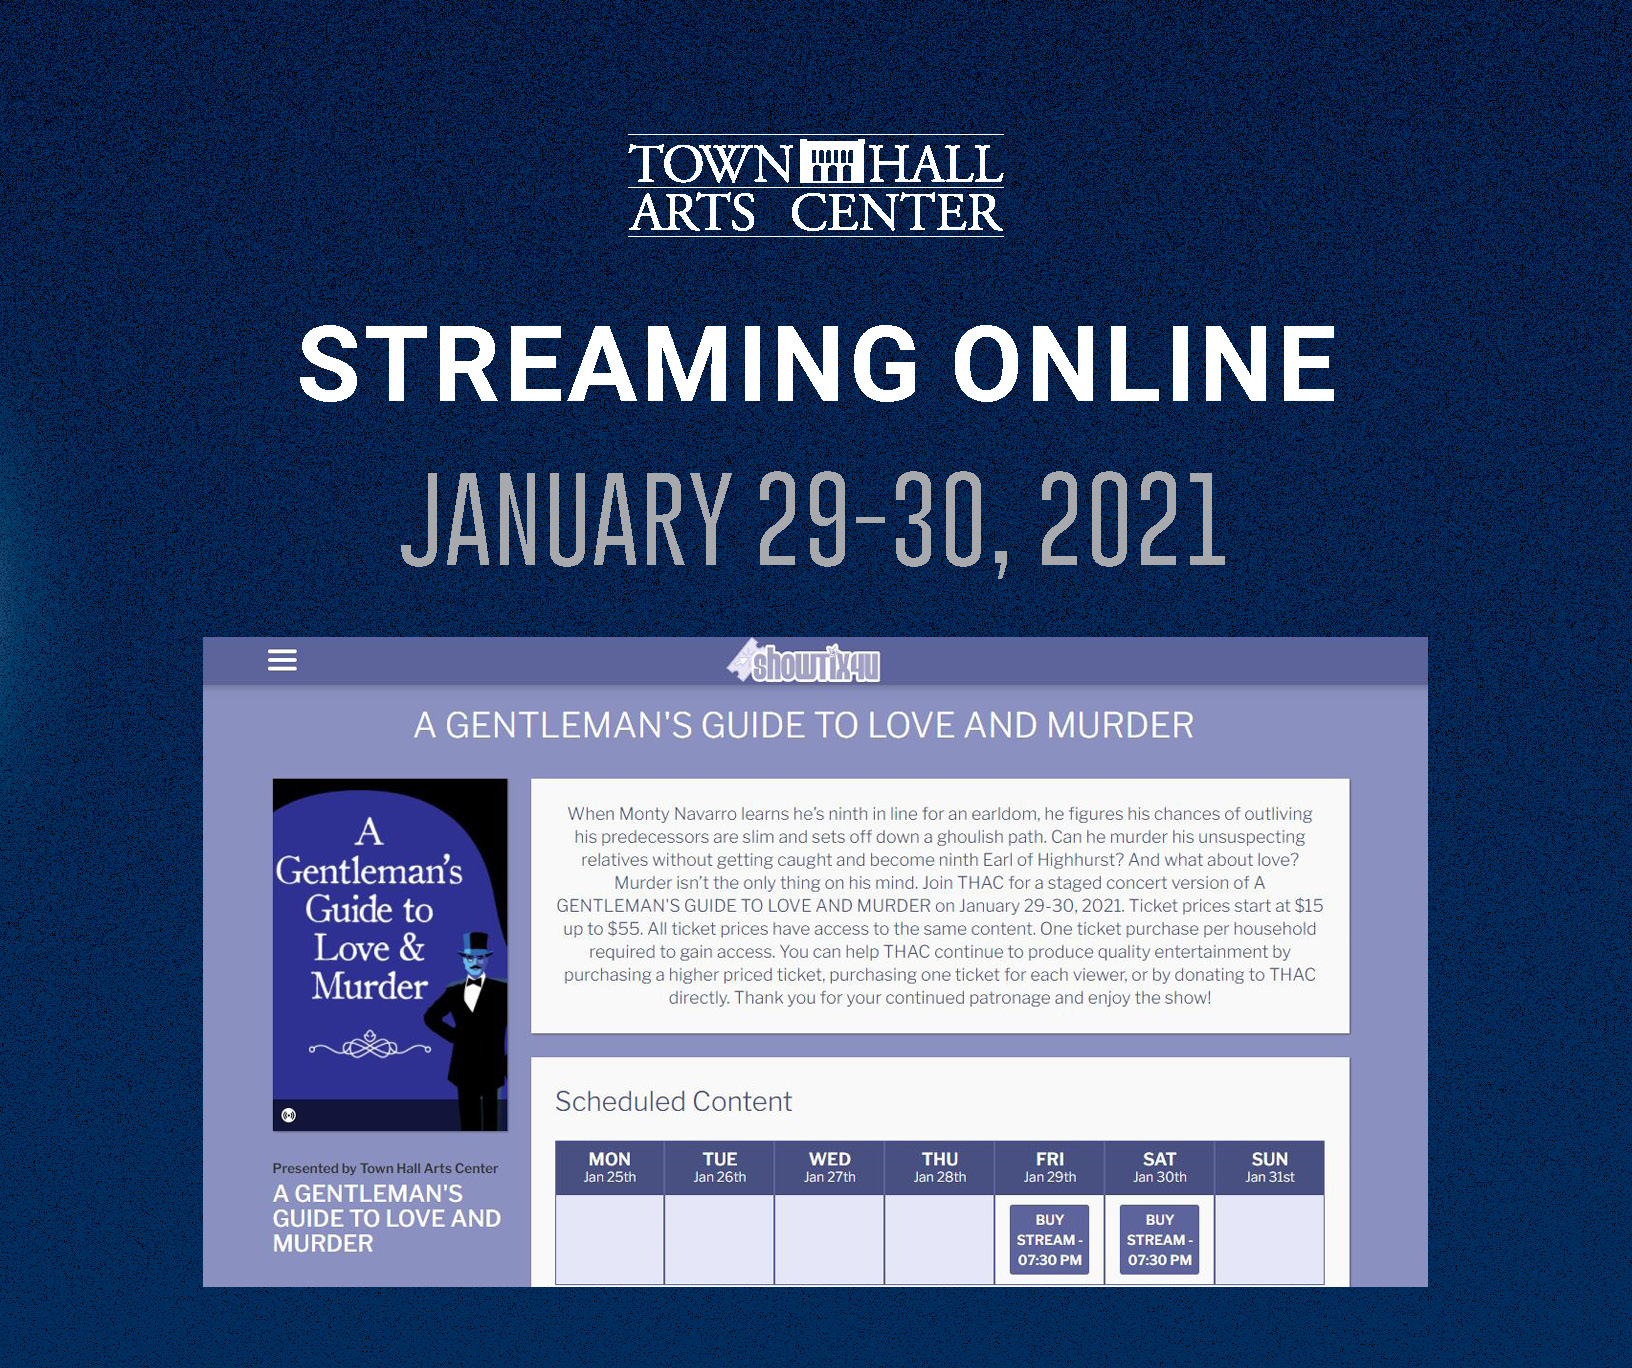 Online Streaming: A Gentleman’s Guide to Love & Murder – January 29-30, 2021